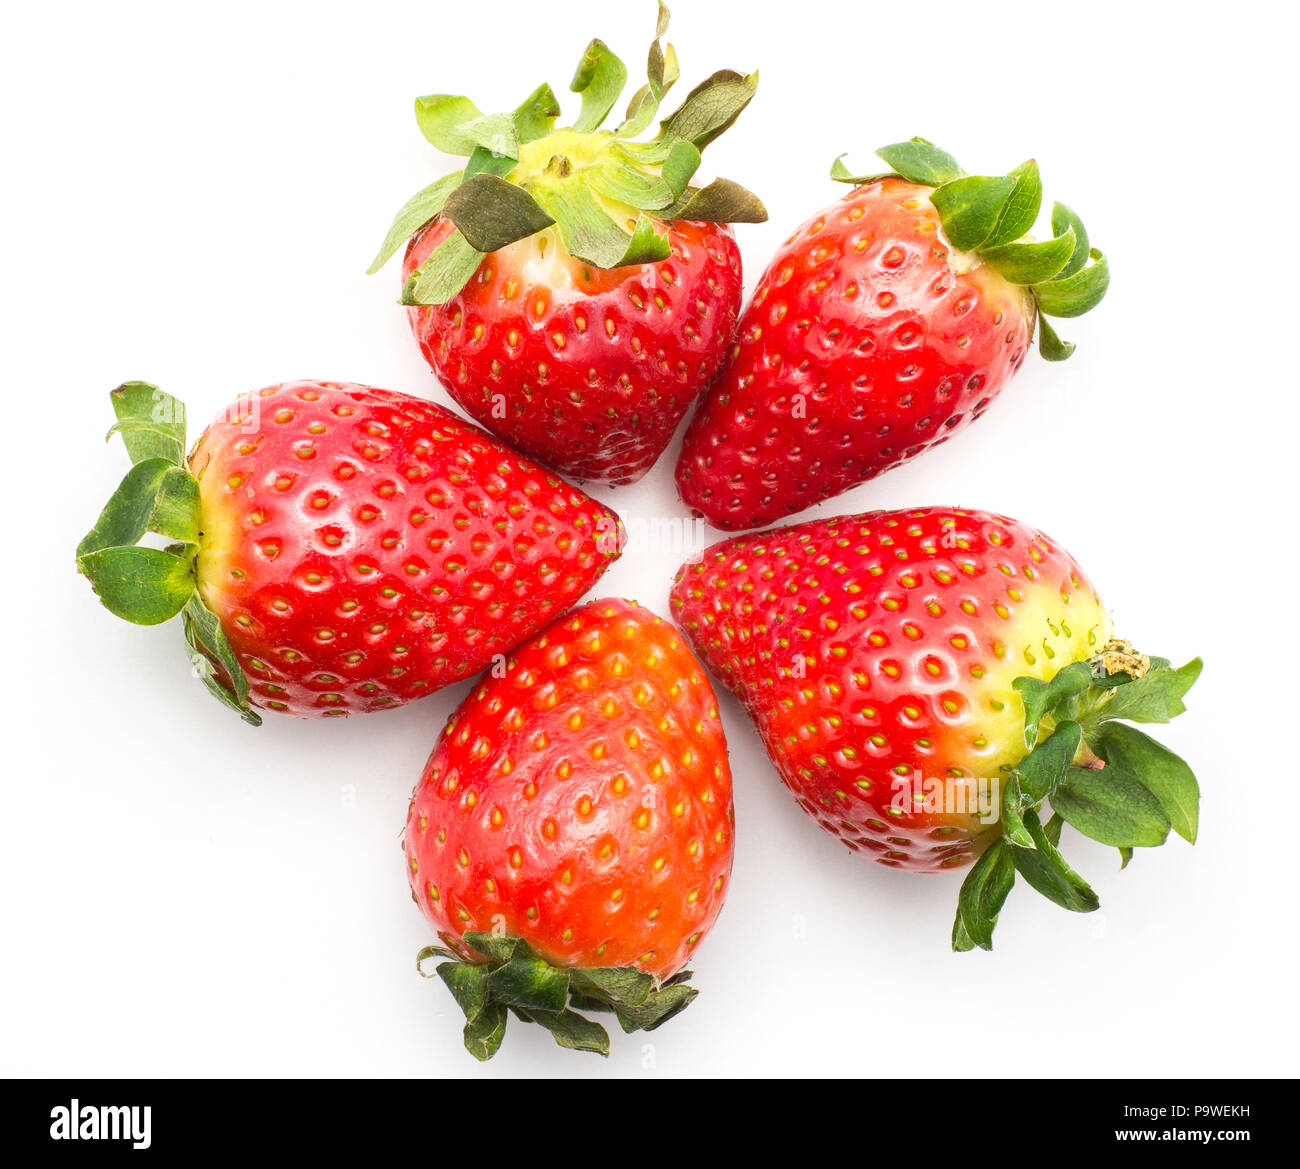 Five garden strawberries put together like a flower isolated on white background Stock Photo